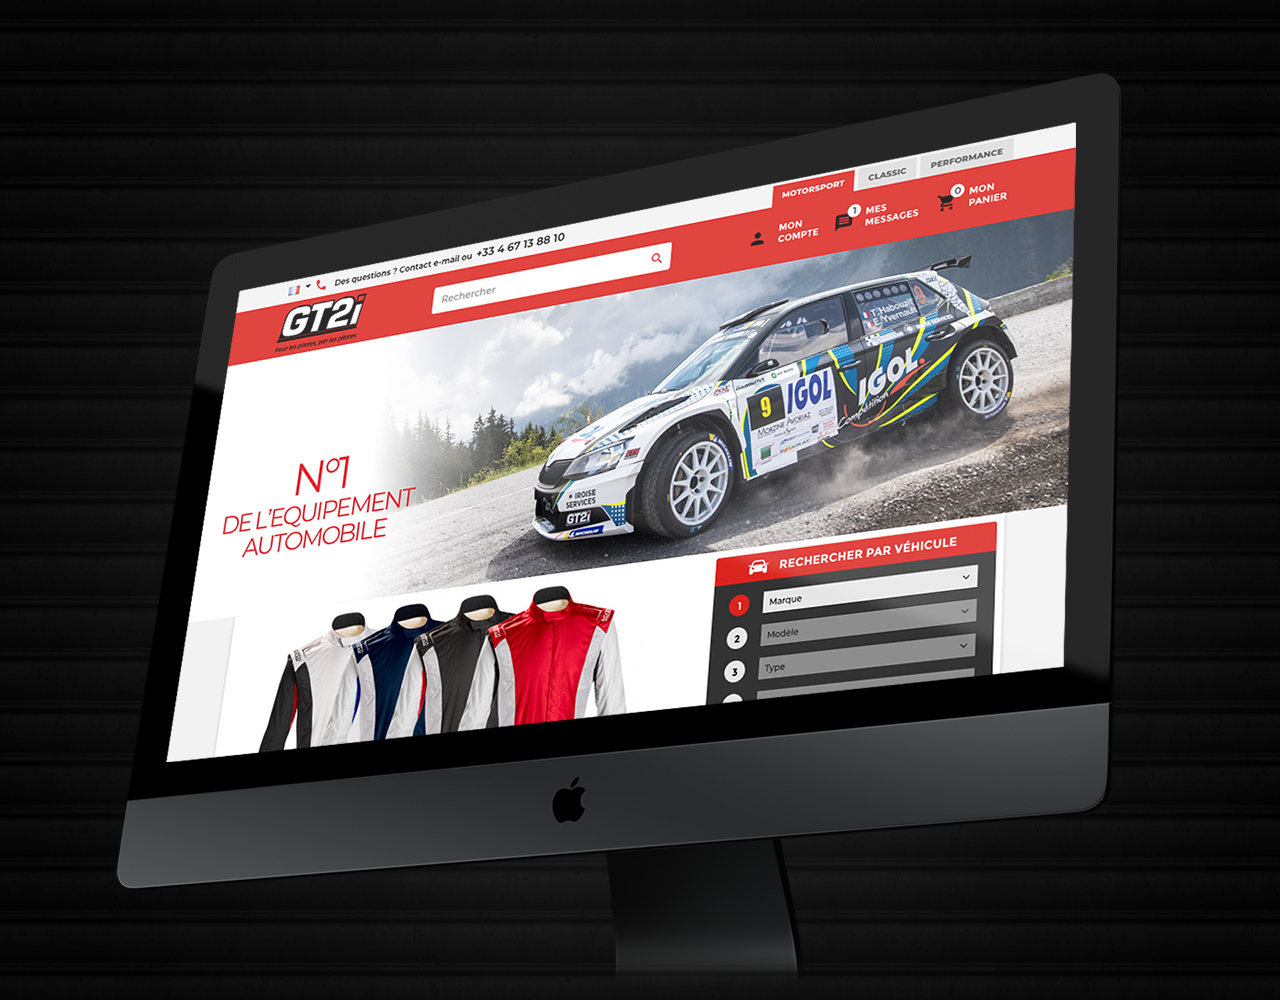 Site web e-commerce rallye tuning racing compétition automobile GT2i